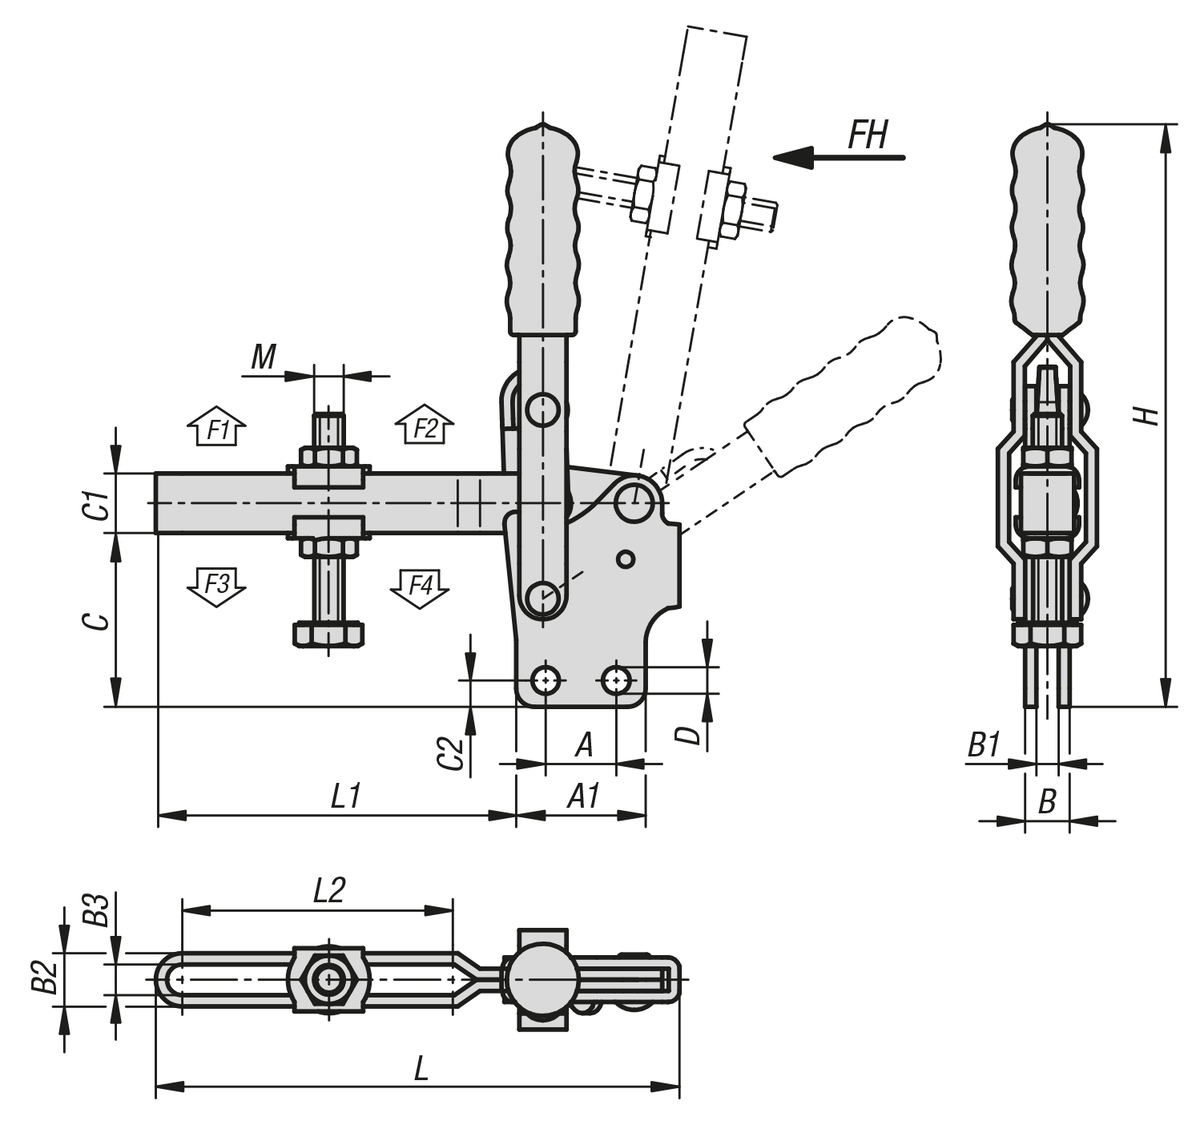 Toggle clamps vertical with straight foot and adjustable clamping spindle